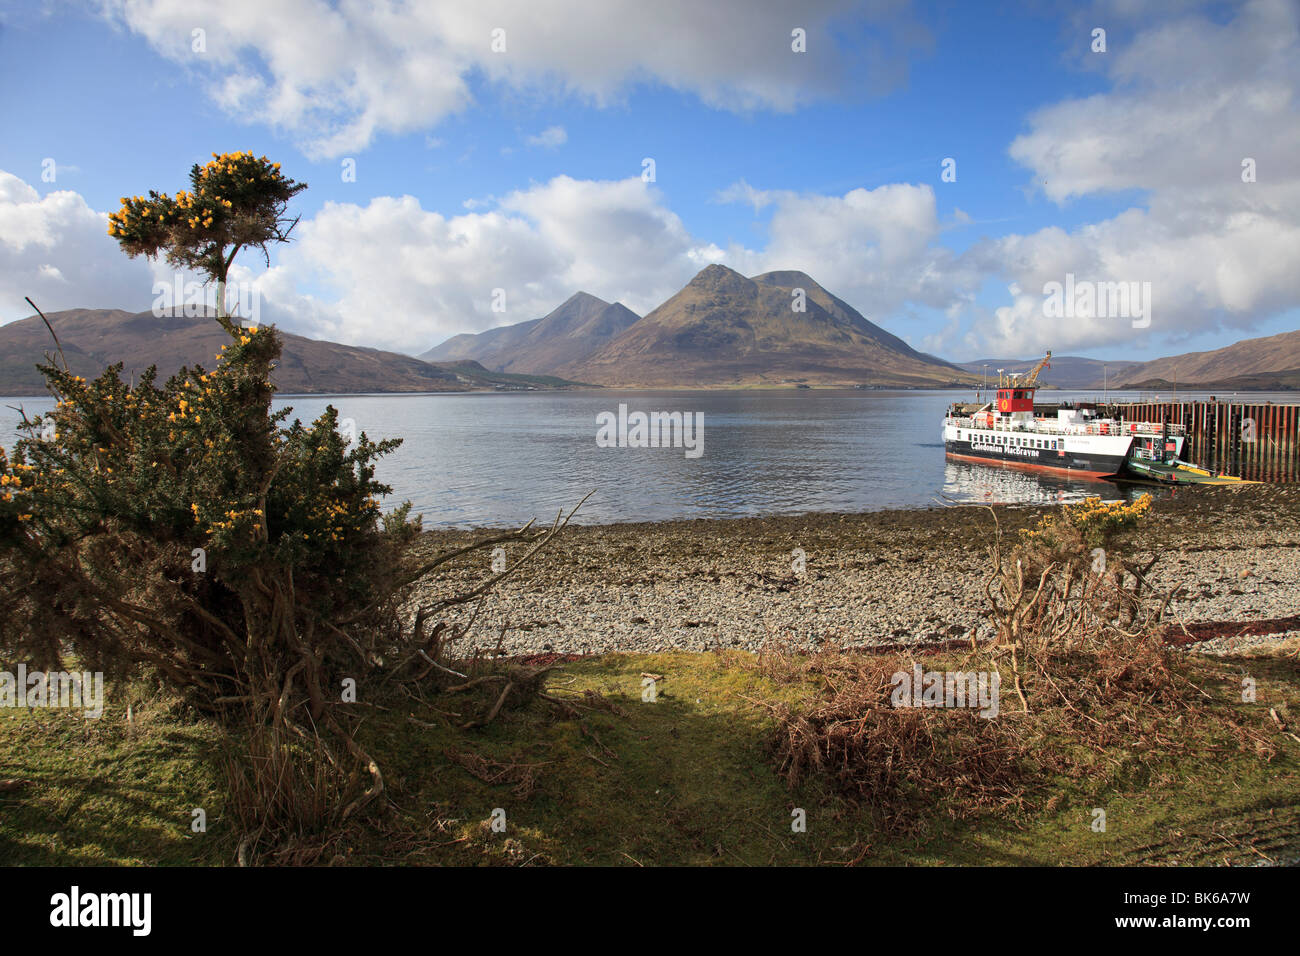 View from Inverarish on the Isle of Raasay to the Cuillin mountains on the Isle of Skye with Raasay Ferry waiting to sail Stock Photo